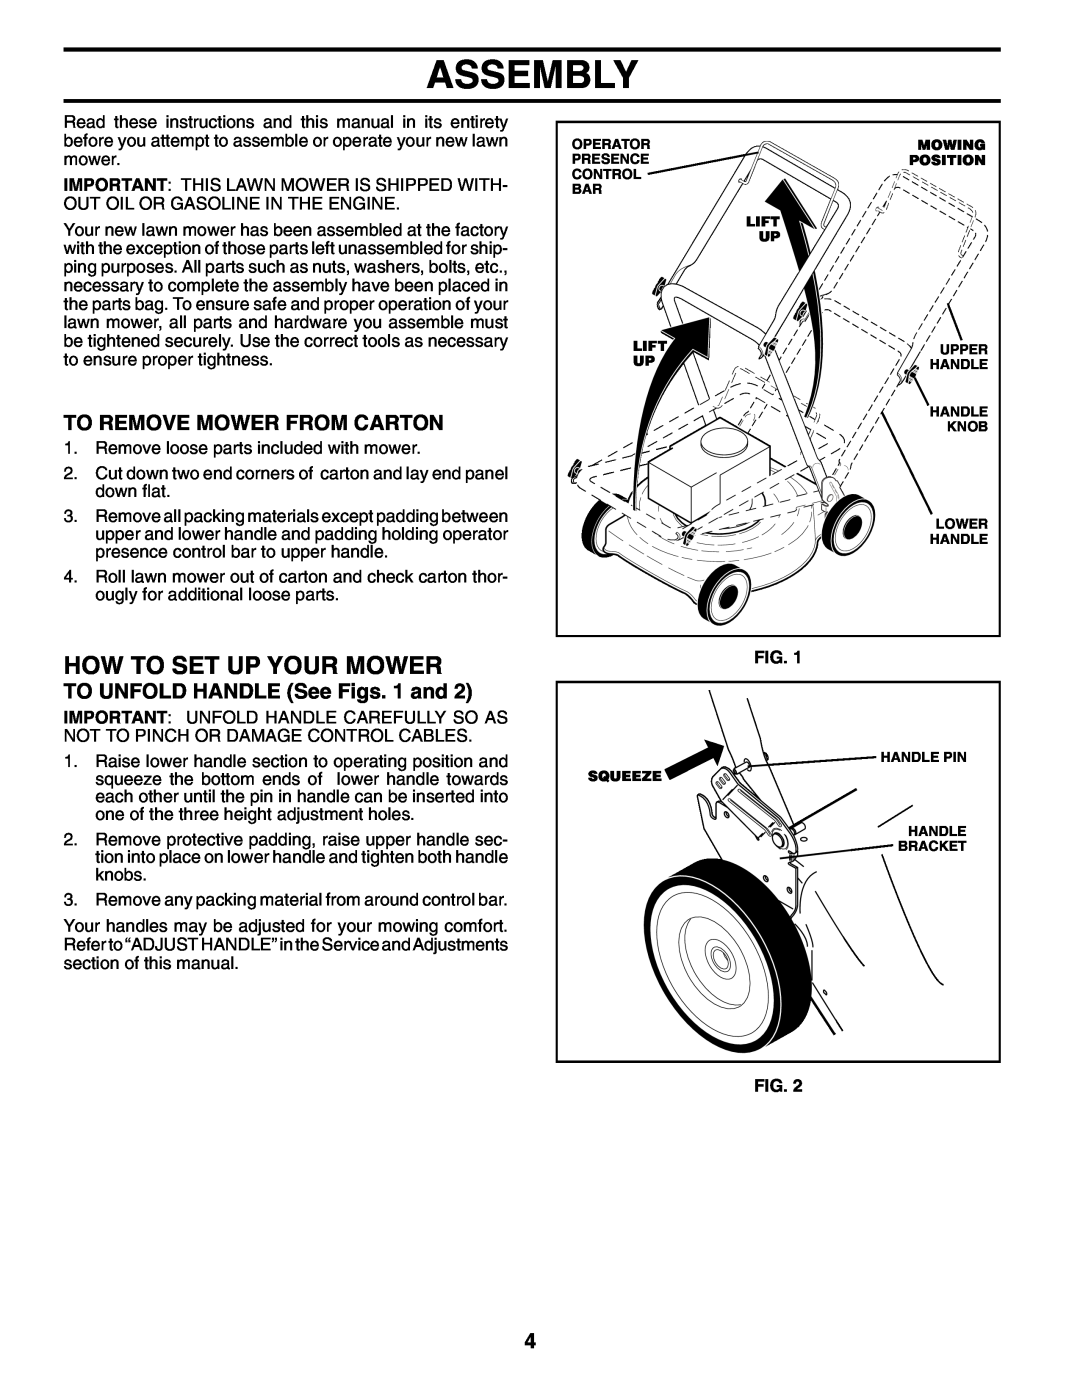 Husqvarna 7021RES Assembly, How To Set Up Your Mower, To Remove Mower From Carton, TO UNFOLD HANDLE See Figs. 1 and 